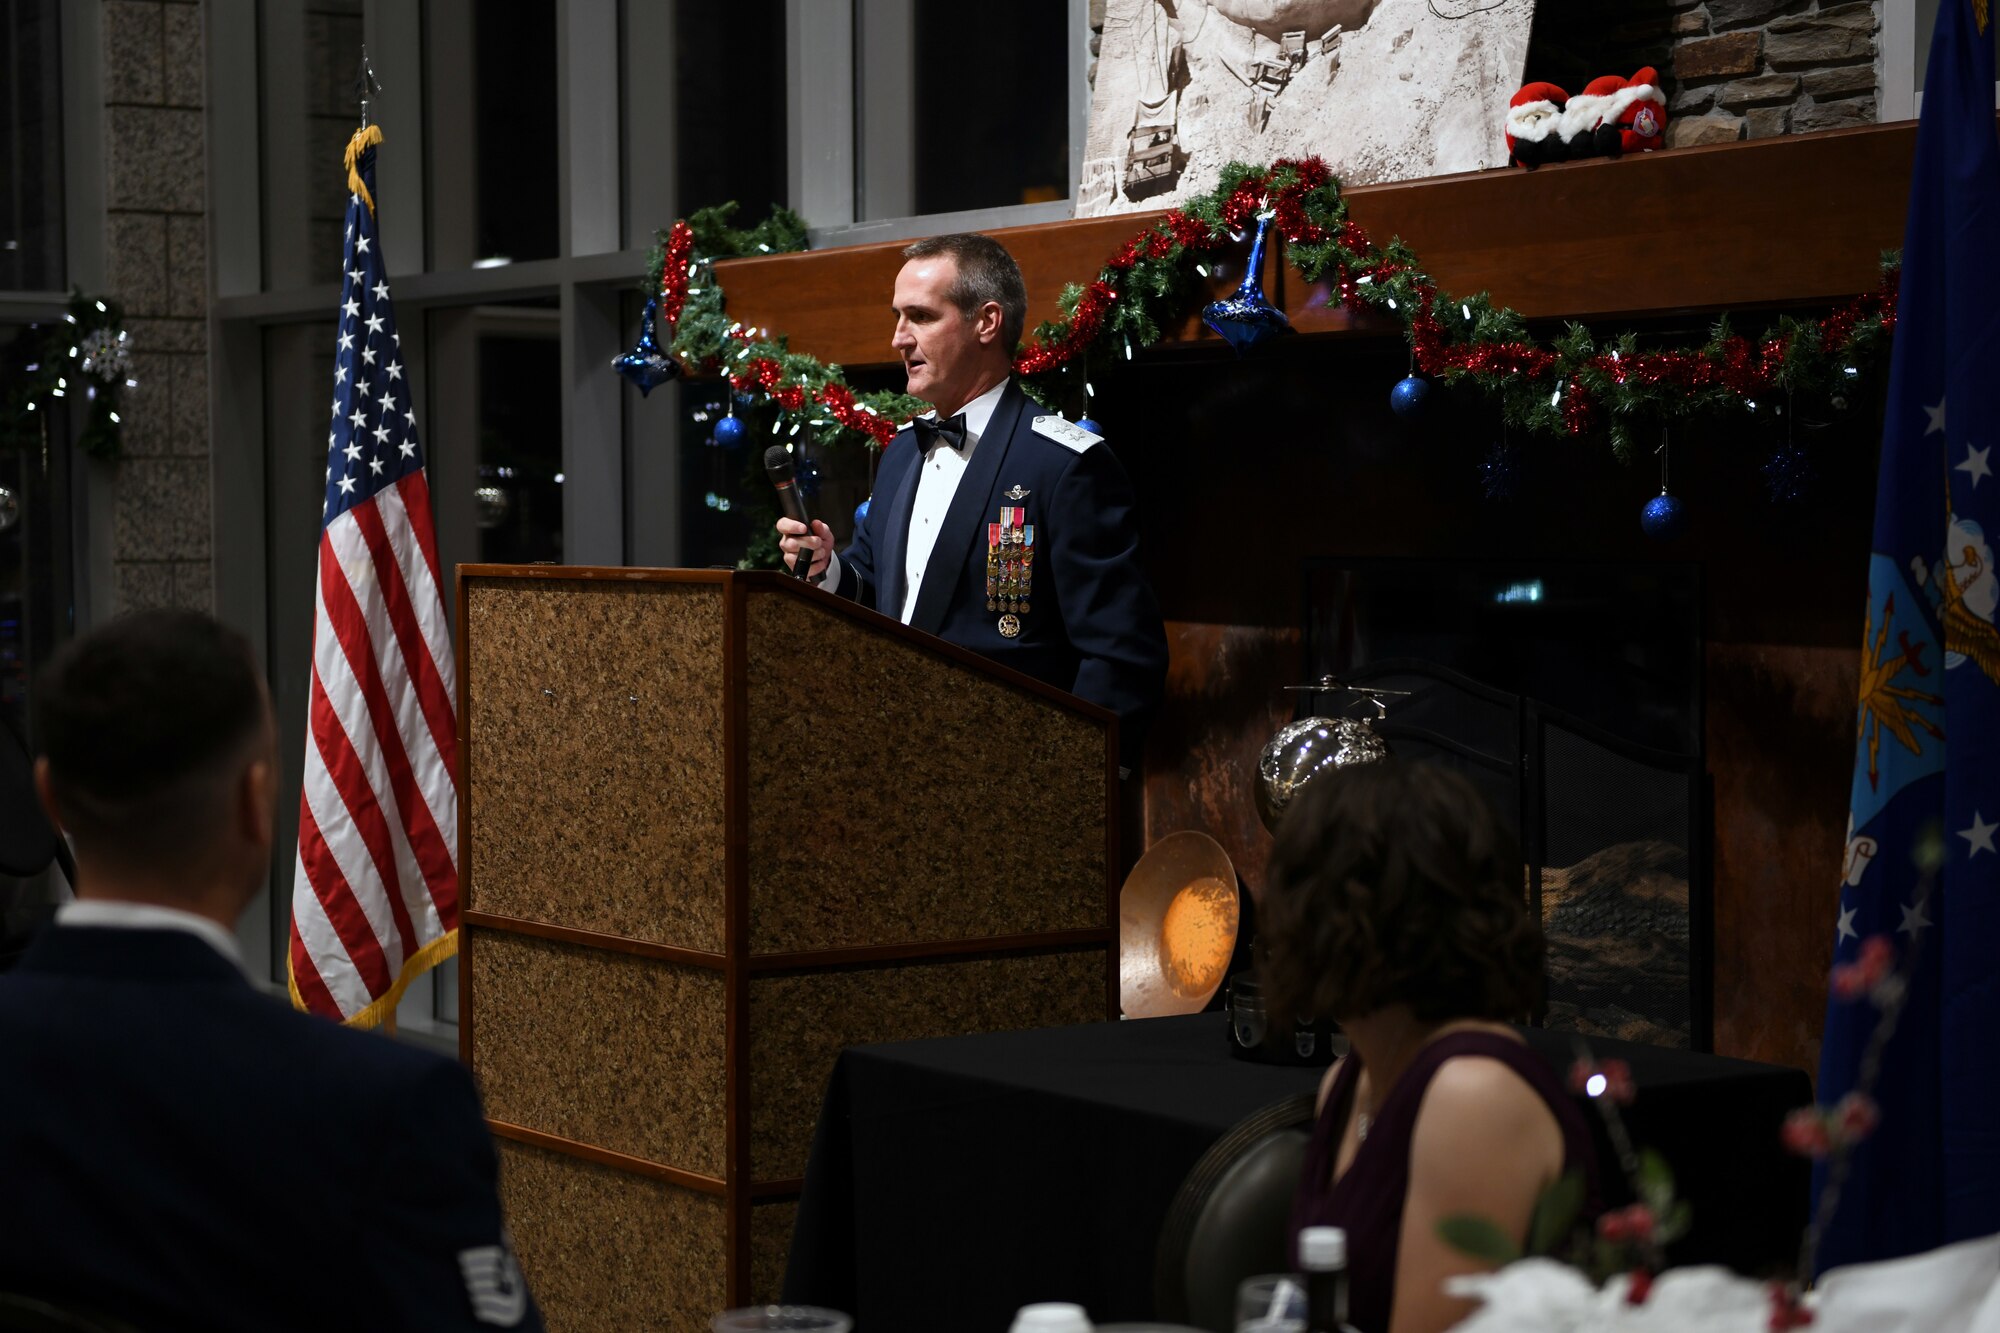 Maj. Gen. Peter Gersten, U.S. Air Force Warfare Center commander, speaks during the General Atomics’ MQ-1B/9 Squadron of the Year awards presentation at Mount Rushmore in Keystone, S.D., Dec. 7, 2018. The 89th Attack Squadron, a tenant unit at Ellsworth Air Force Base, won this year’s award. (U.S. Air Force photo by Senior Airman Denise Jenson)